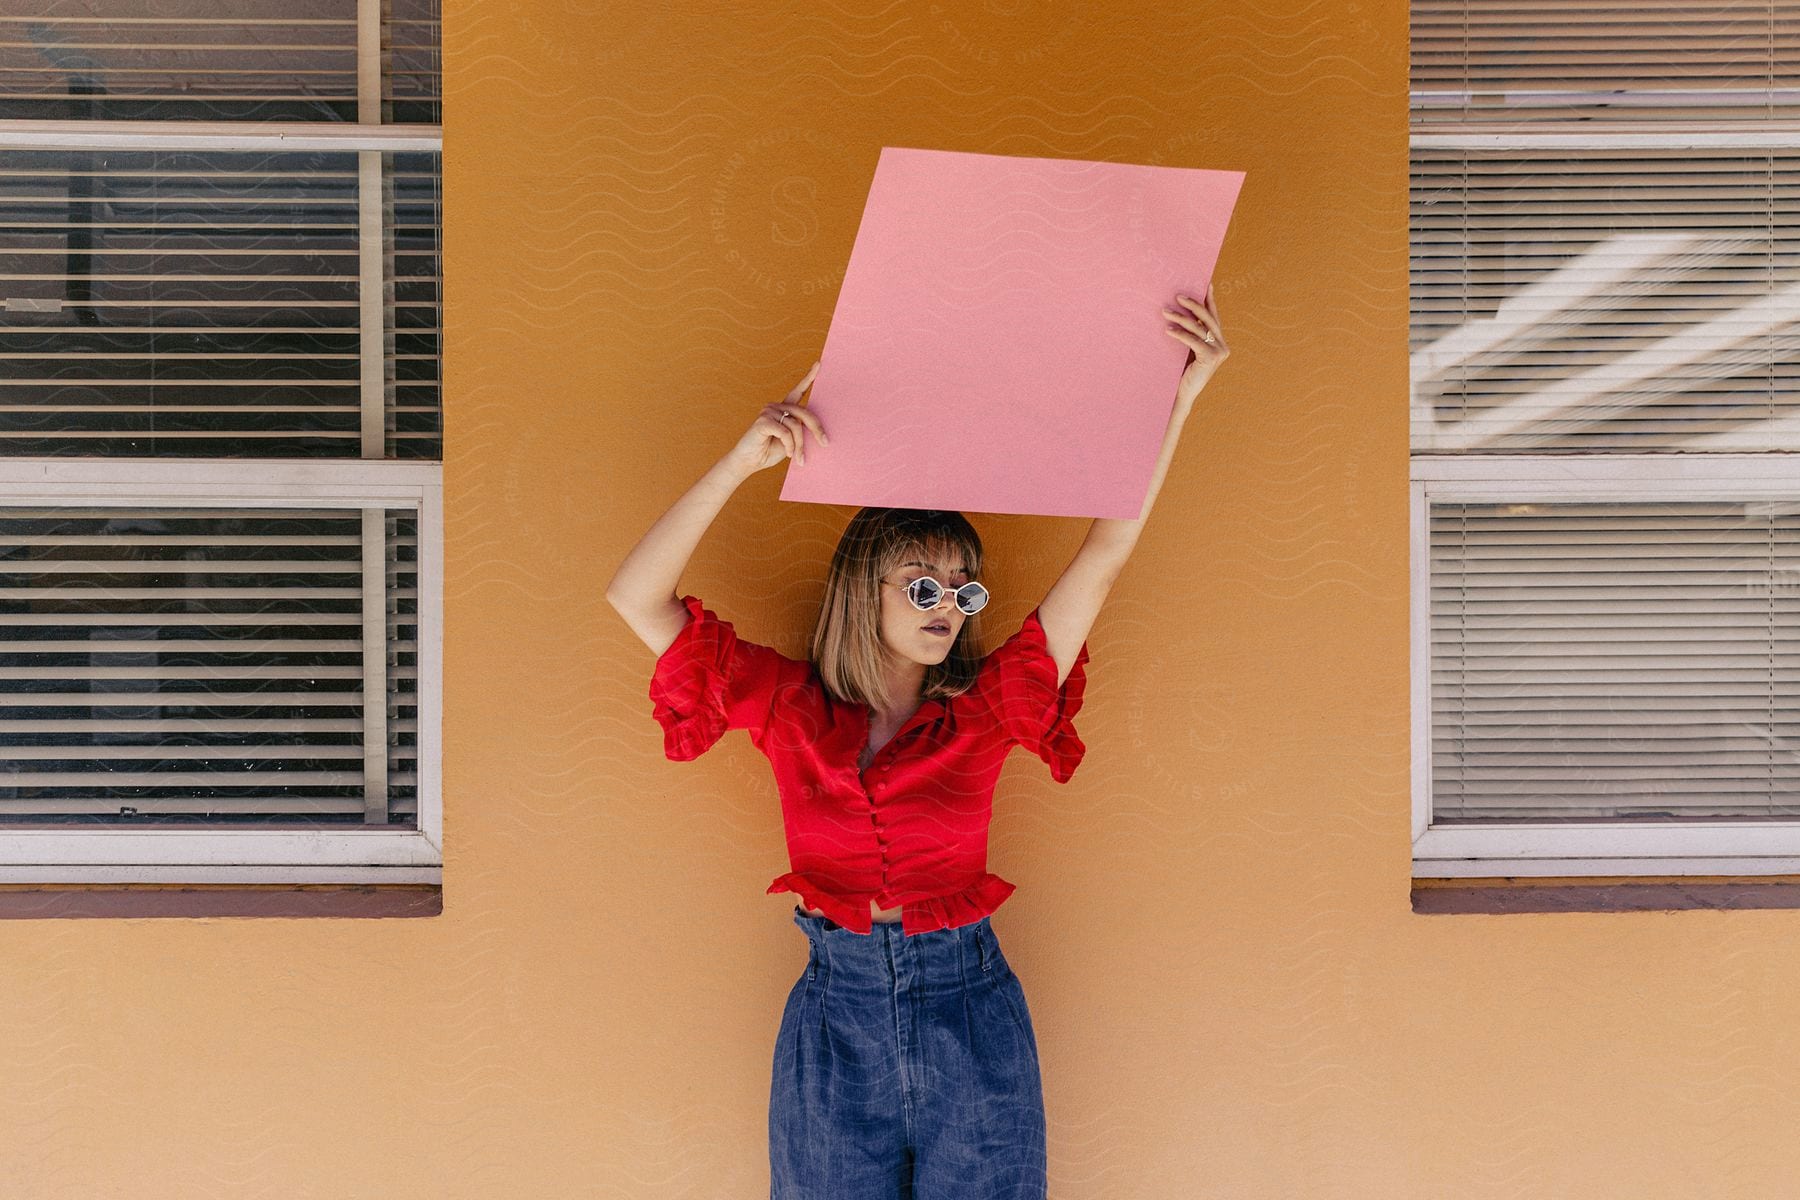 A woman with brown hair, sunglasses, a red blouse, and jeans holds up a pink paper in front of an orange wall between windows